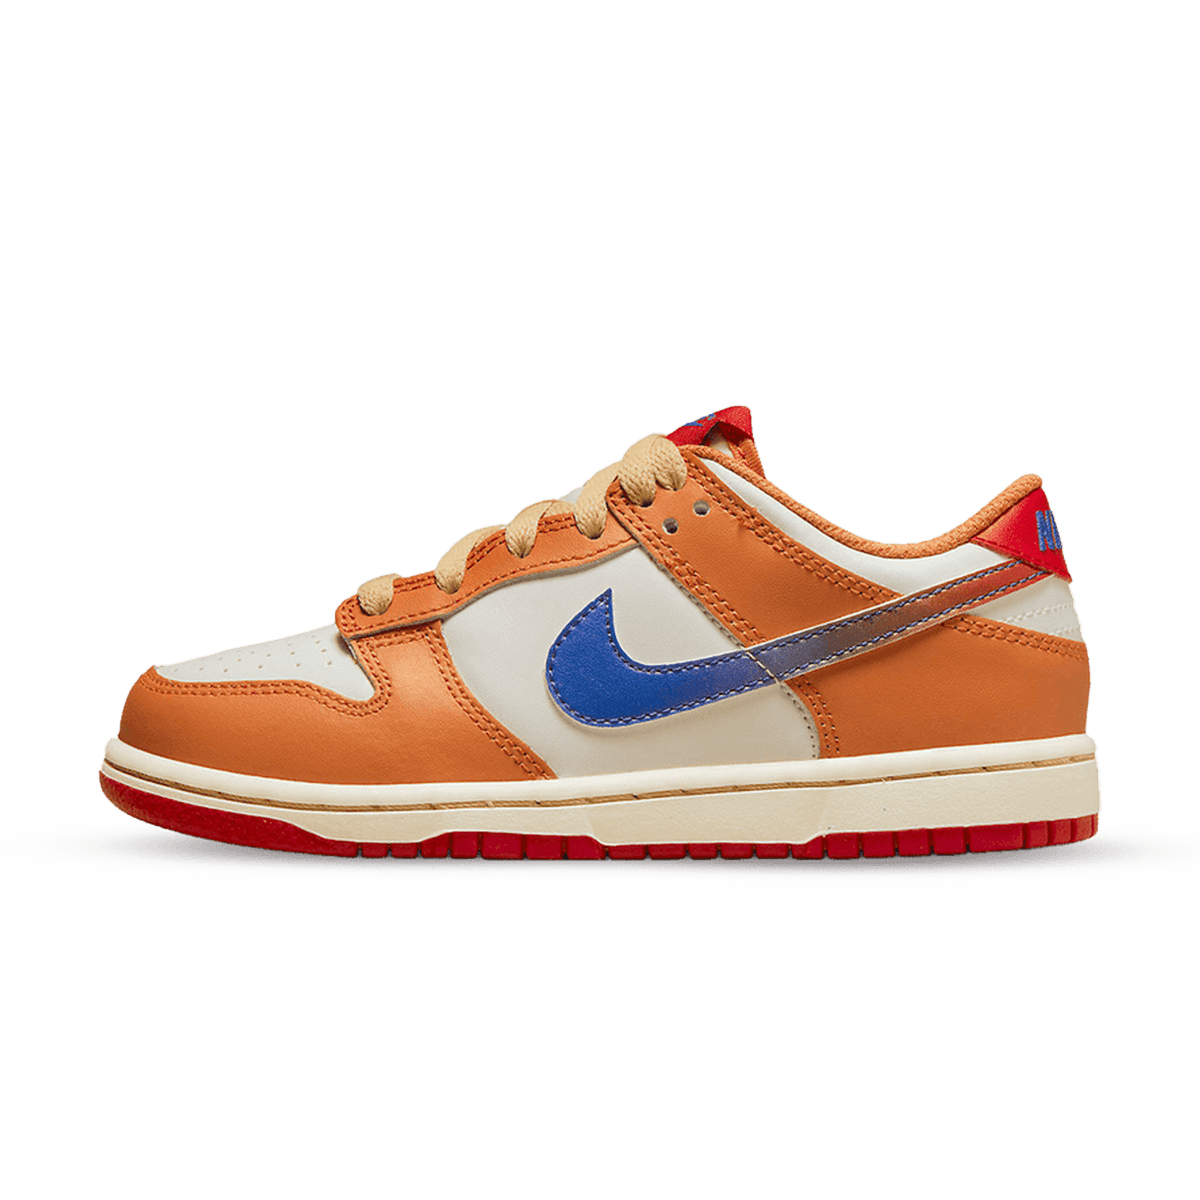 nike dunk low gs hot curry game royal DH9765 101